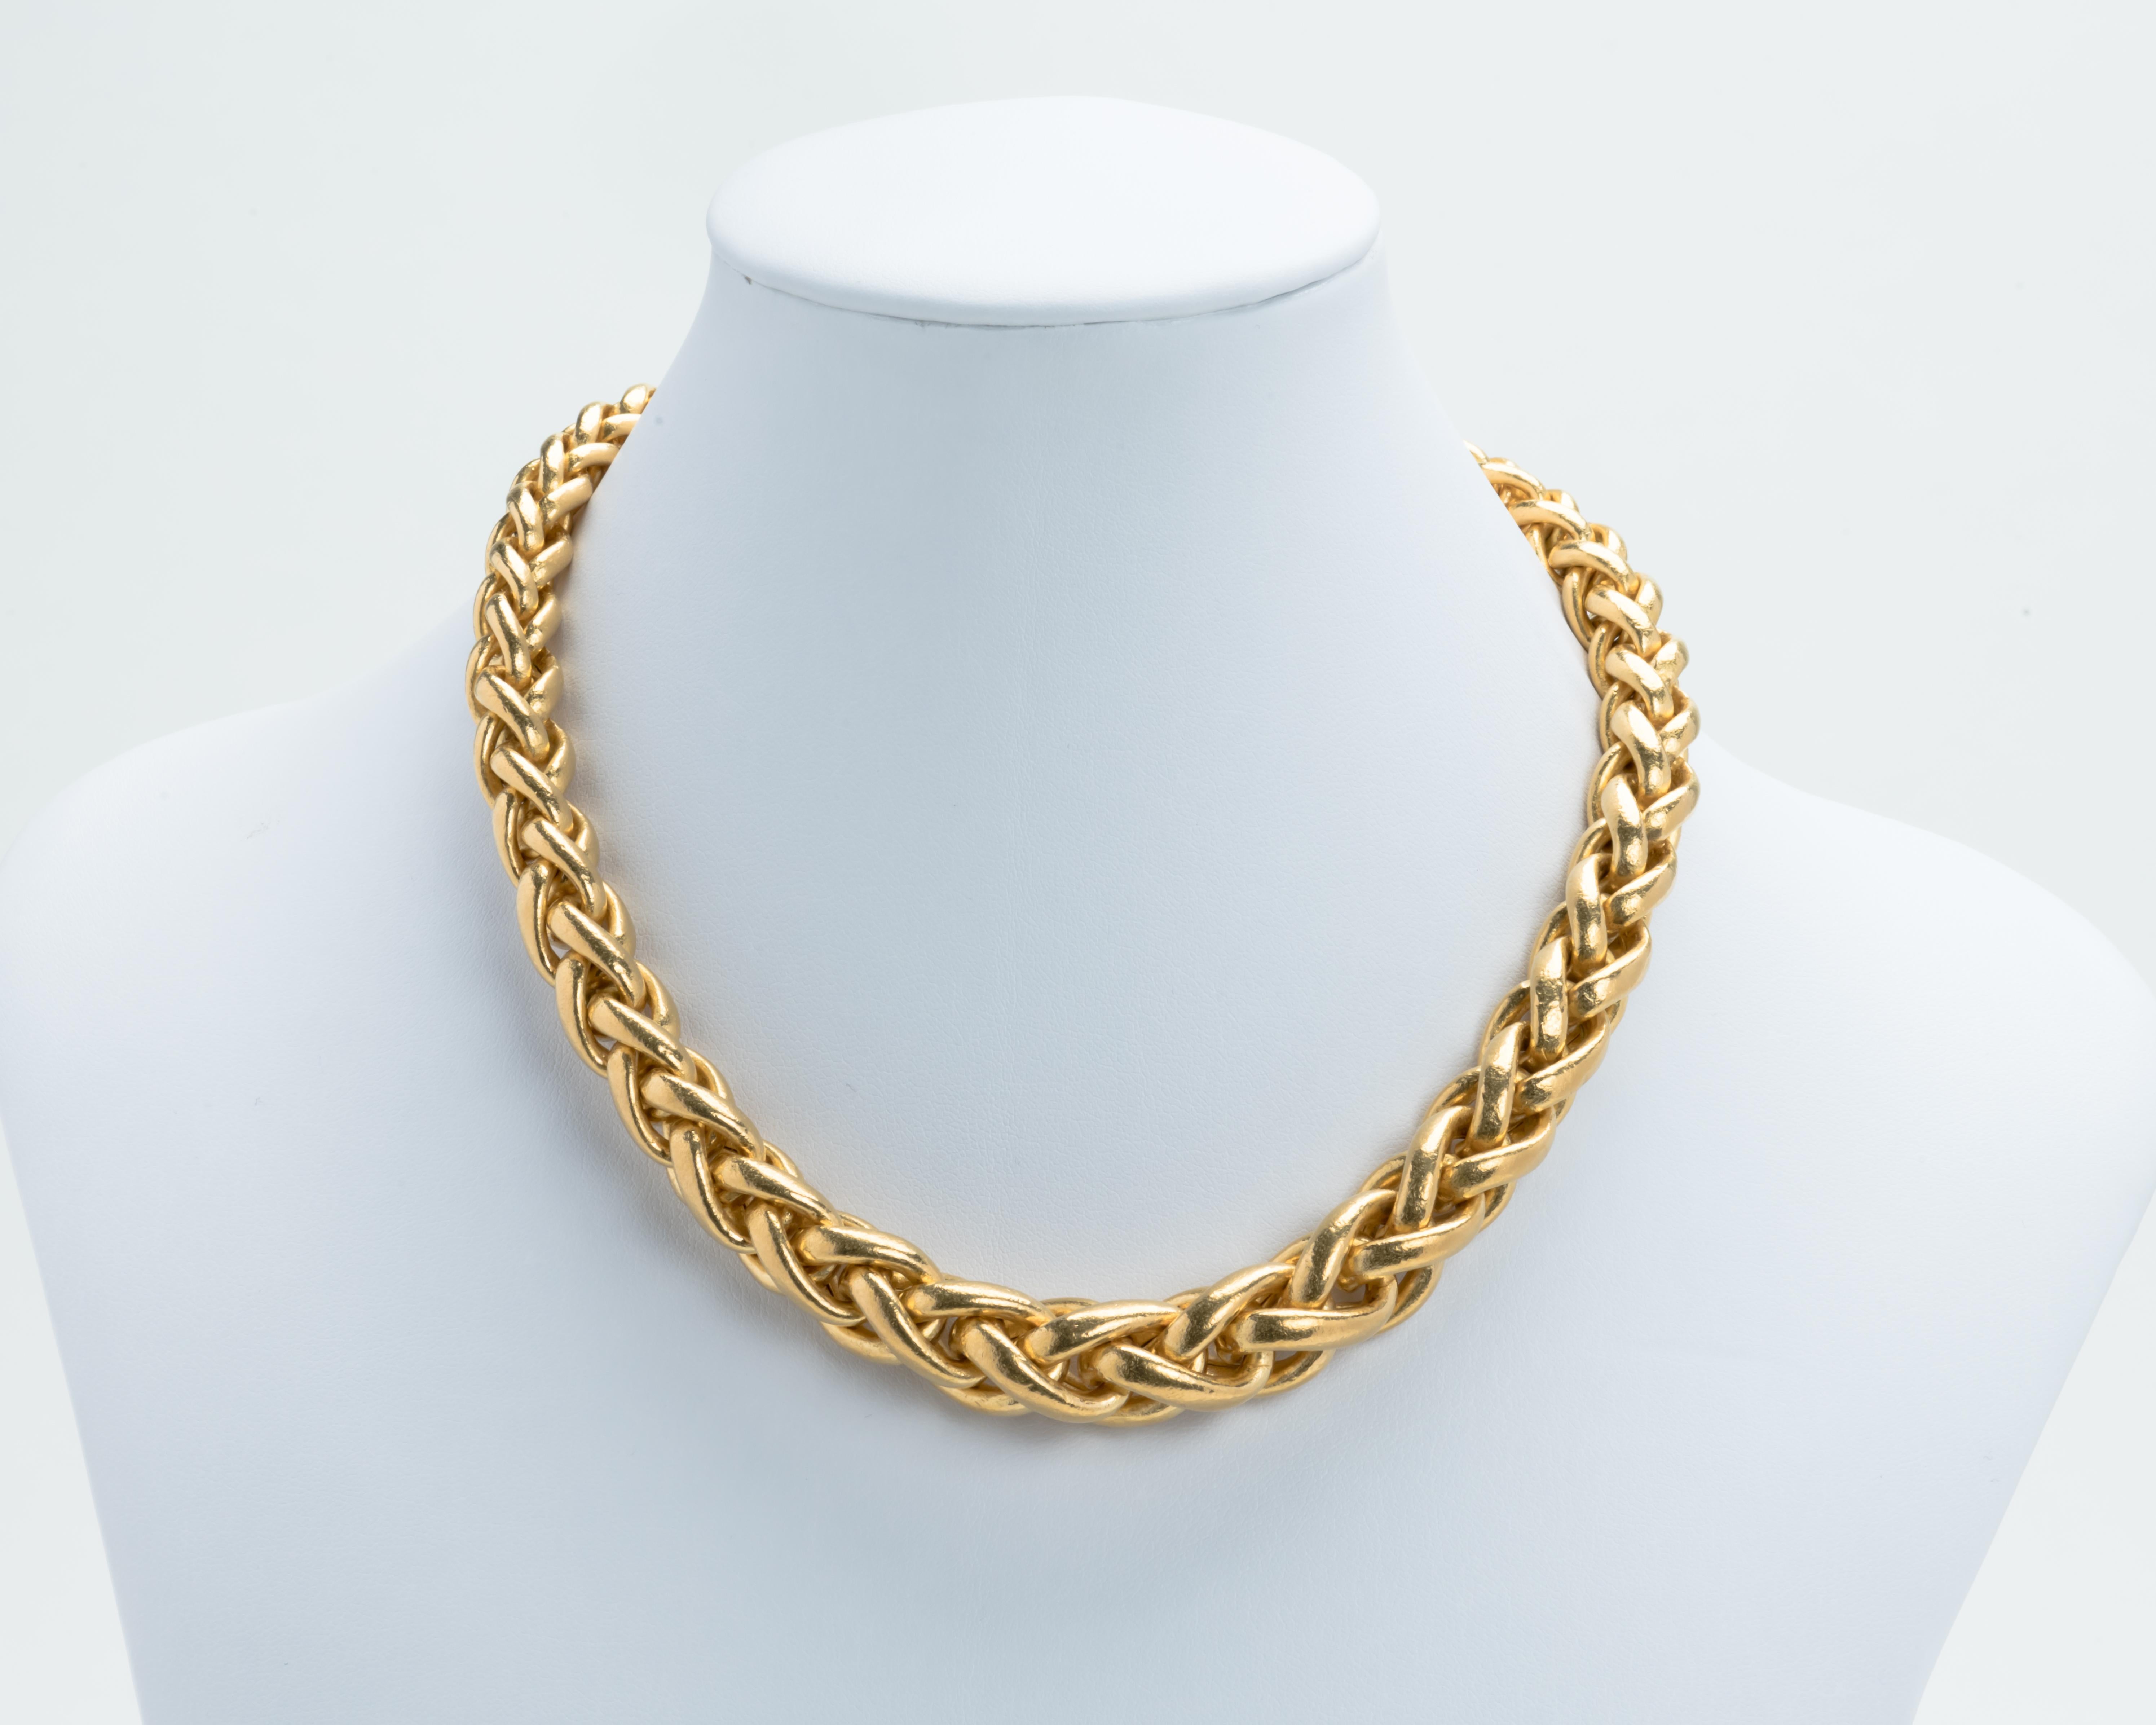 Matching Swiss 24 karat yellow gold, rope style necklace and bracelet. The necklace and bracelet were beautifully hand crafted in circa 1970. The gold color is reminiscent of pieces made 2000 years ago. The clasps are 18 karat gold to support the